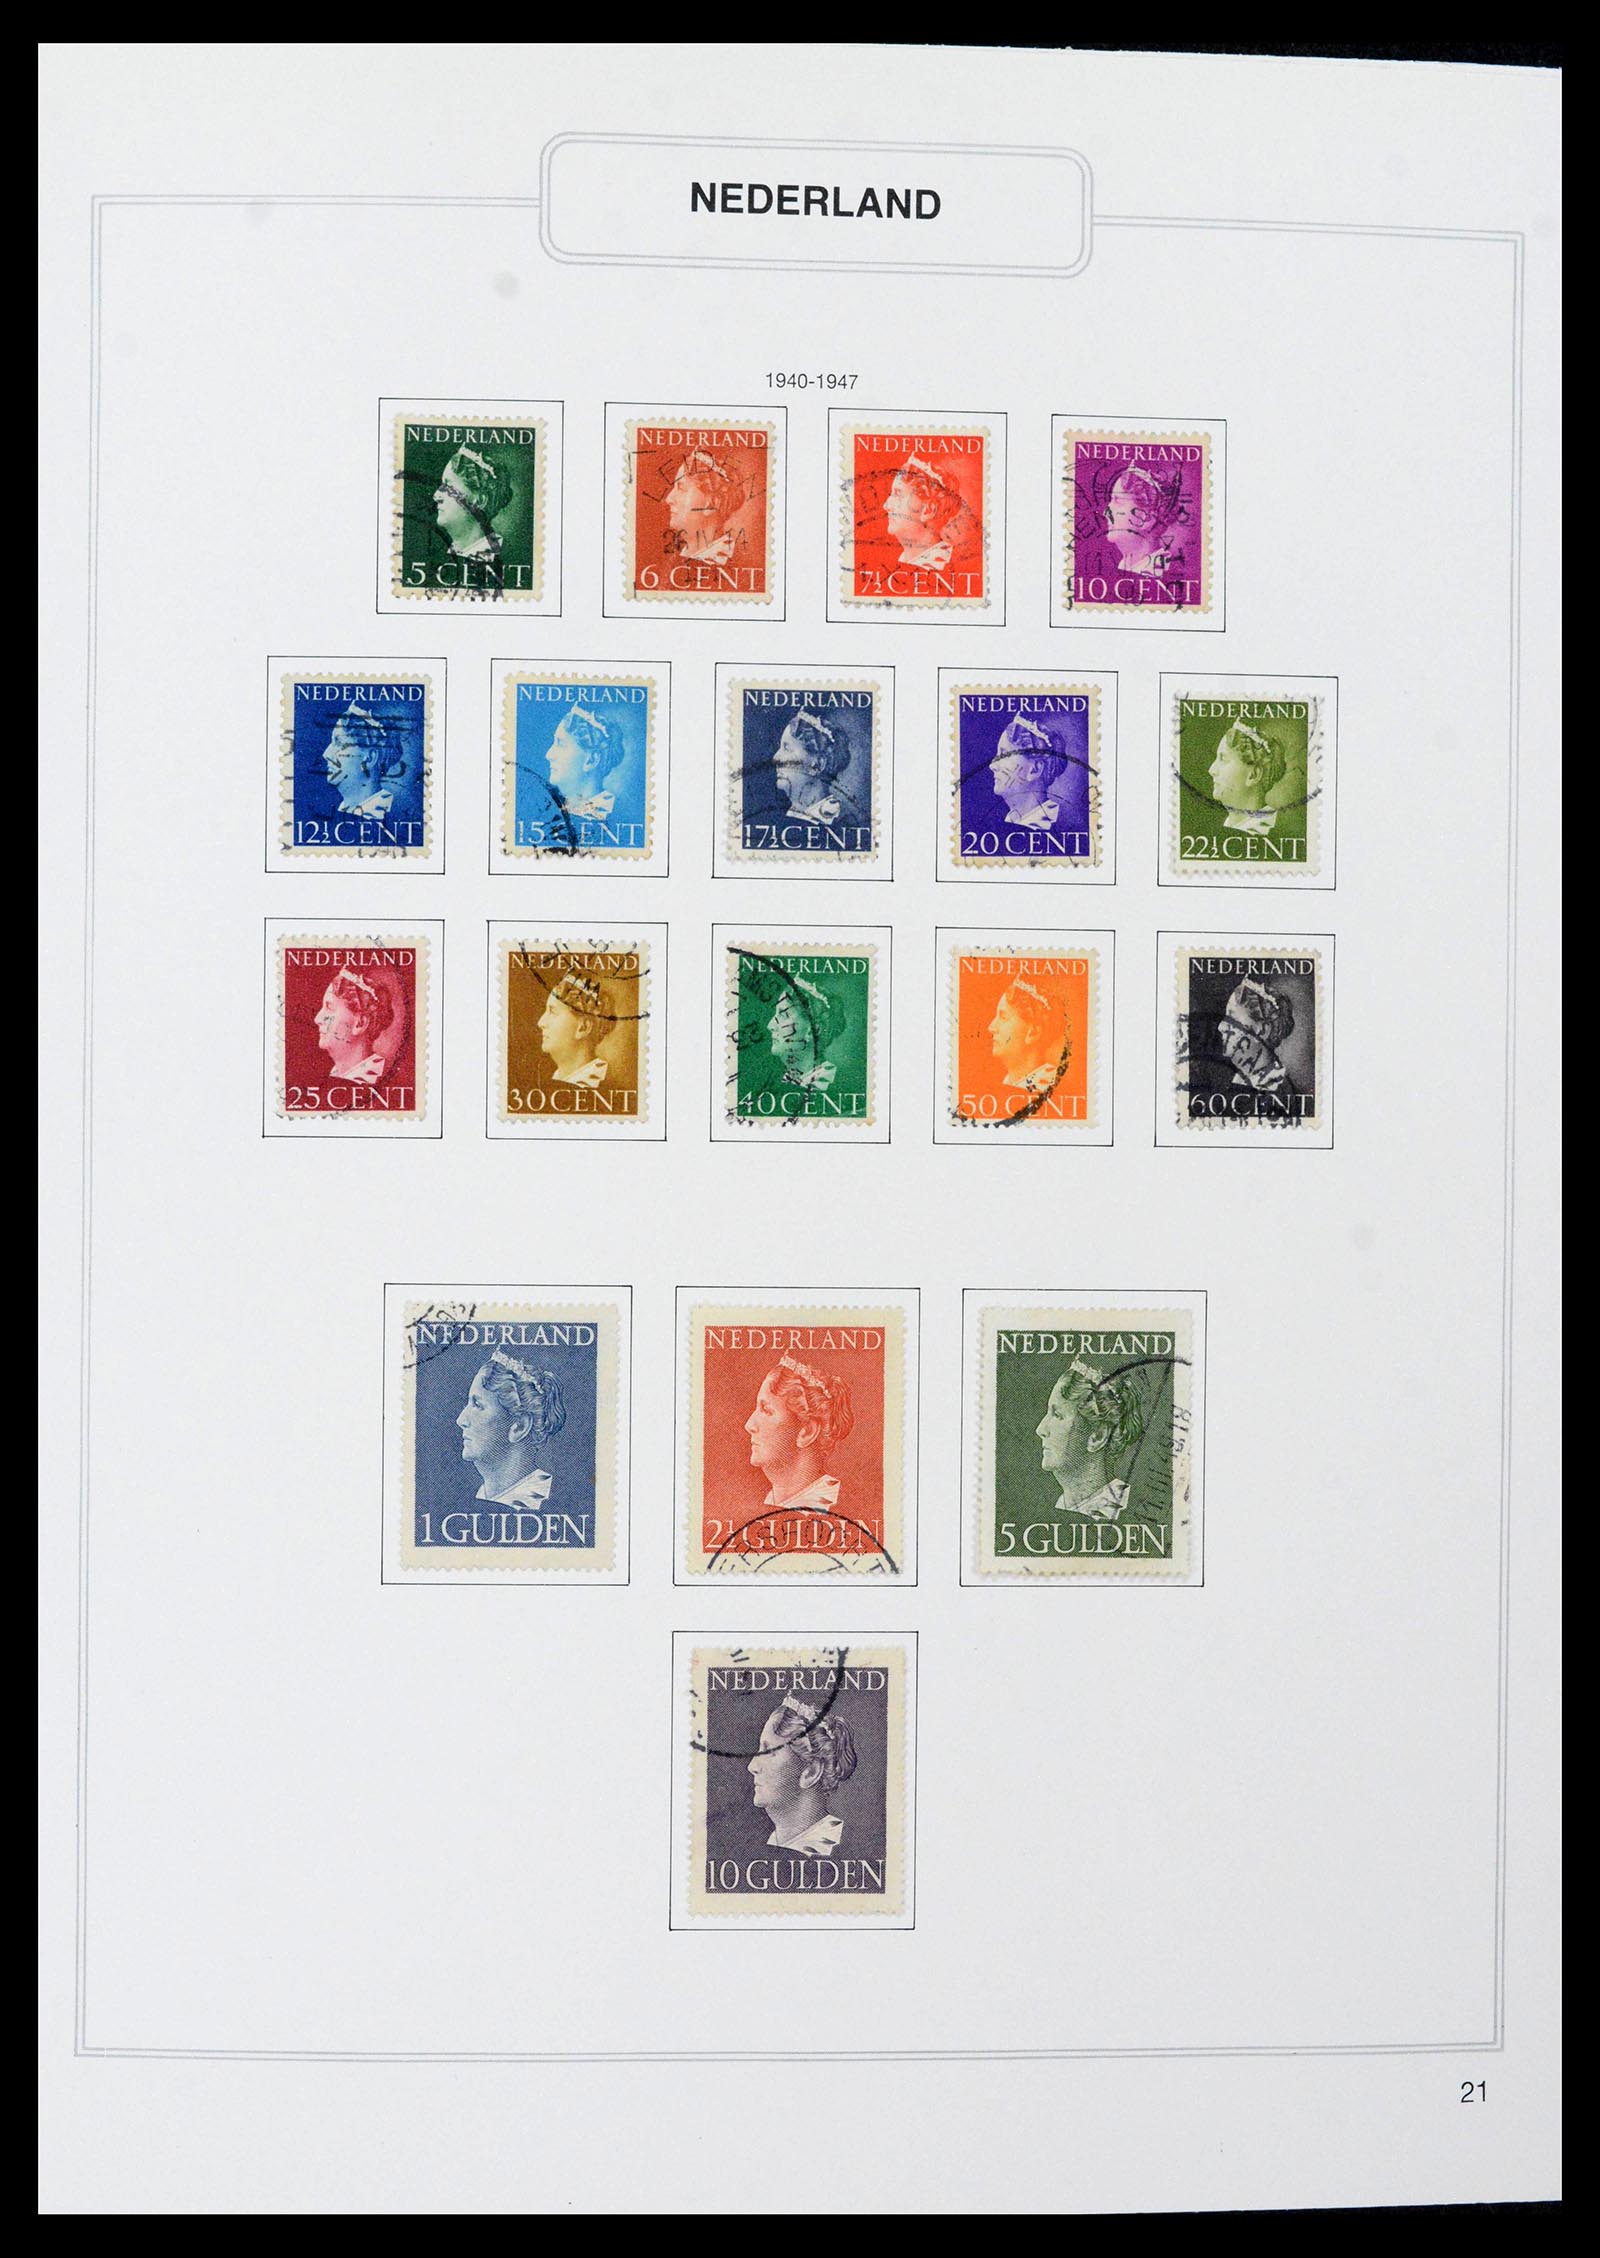 39261 0021 - Stamp collection 39261 Netherlands 1852-2015.